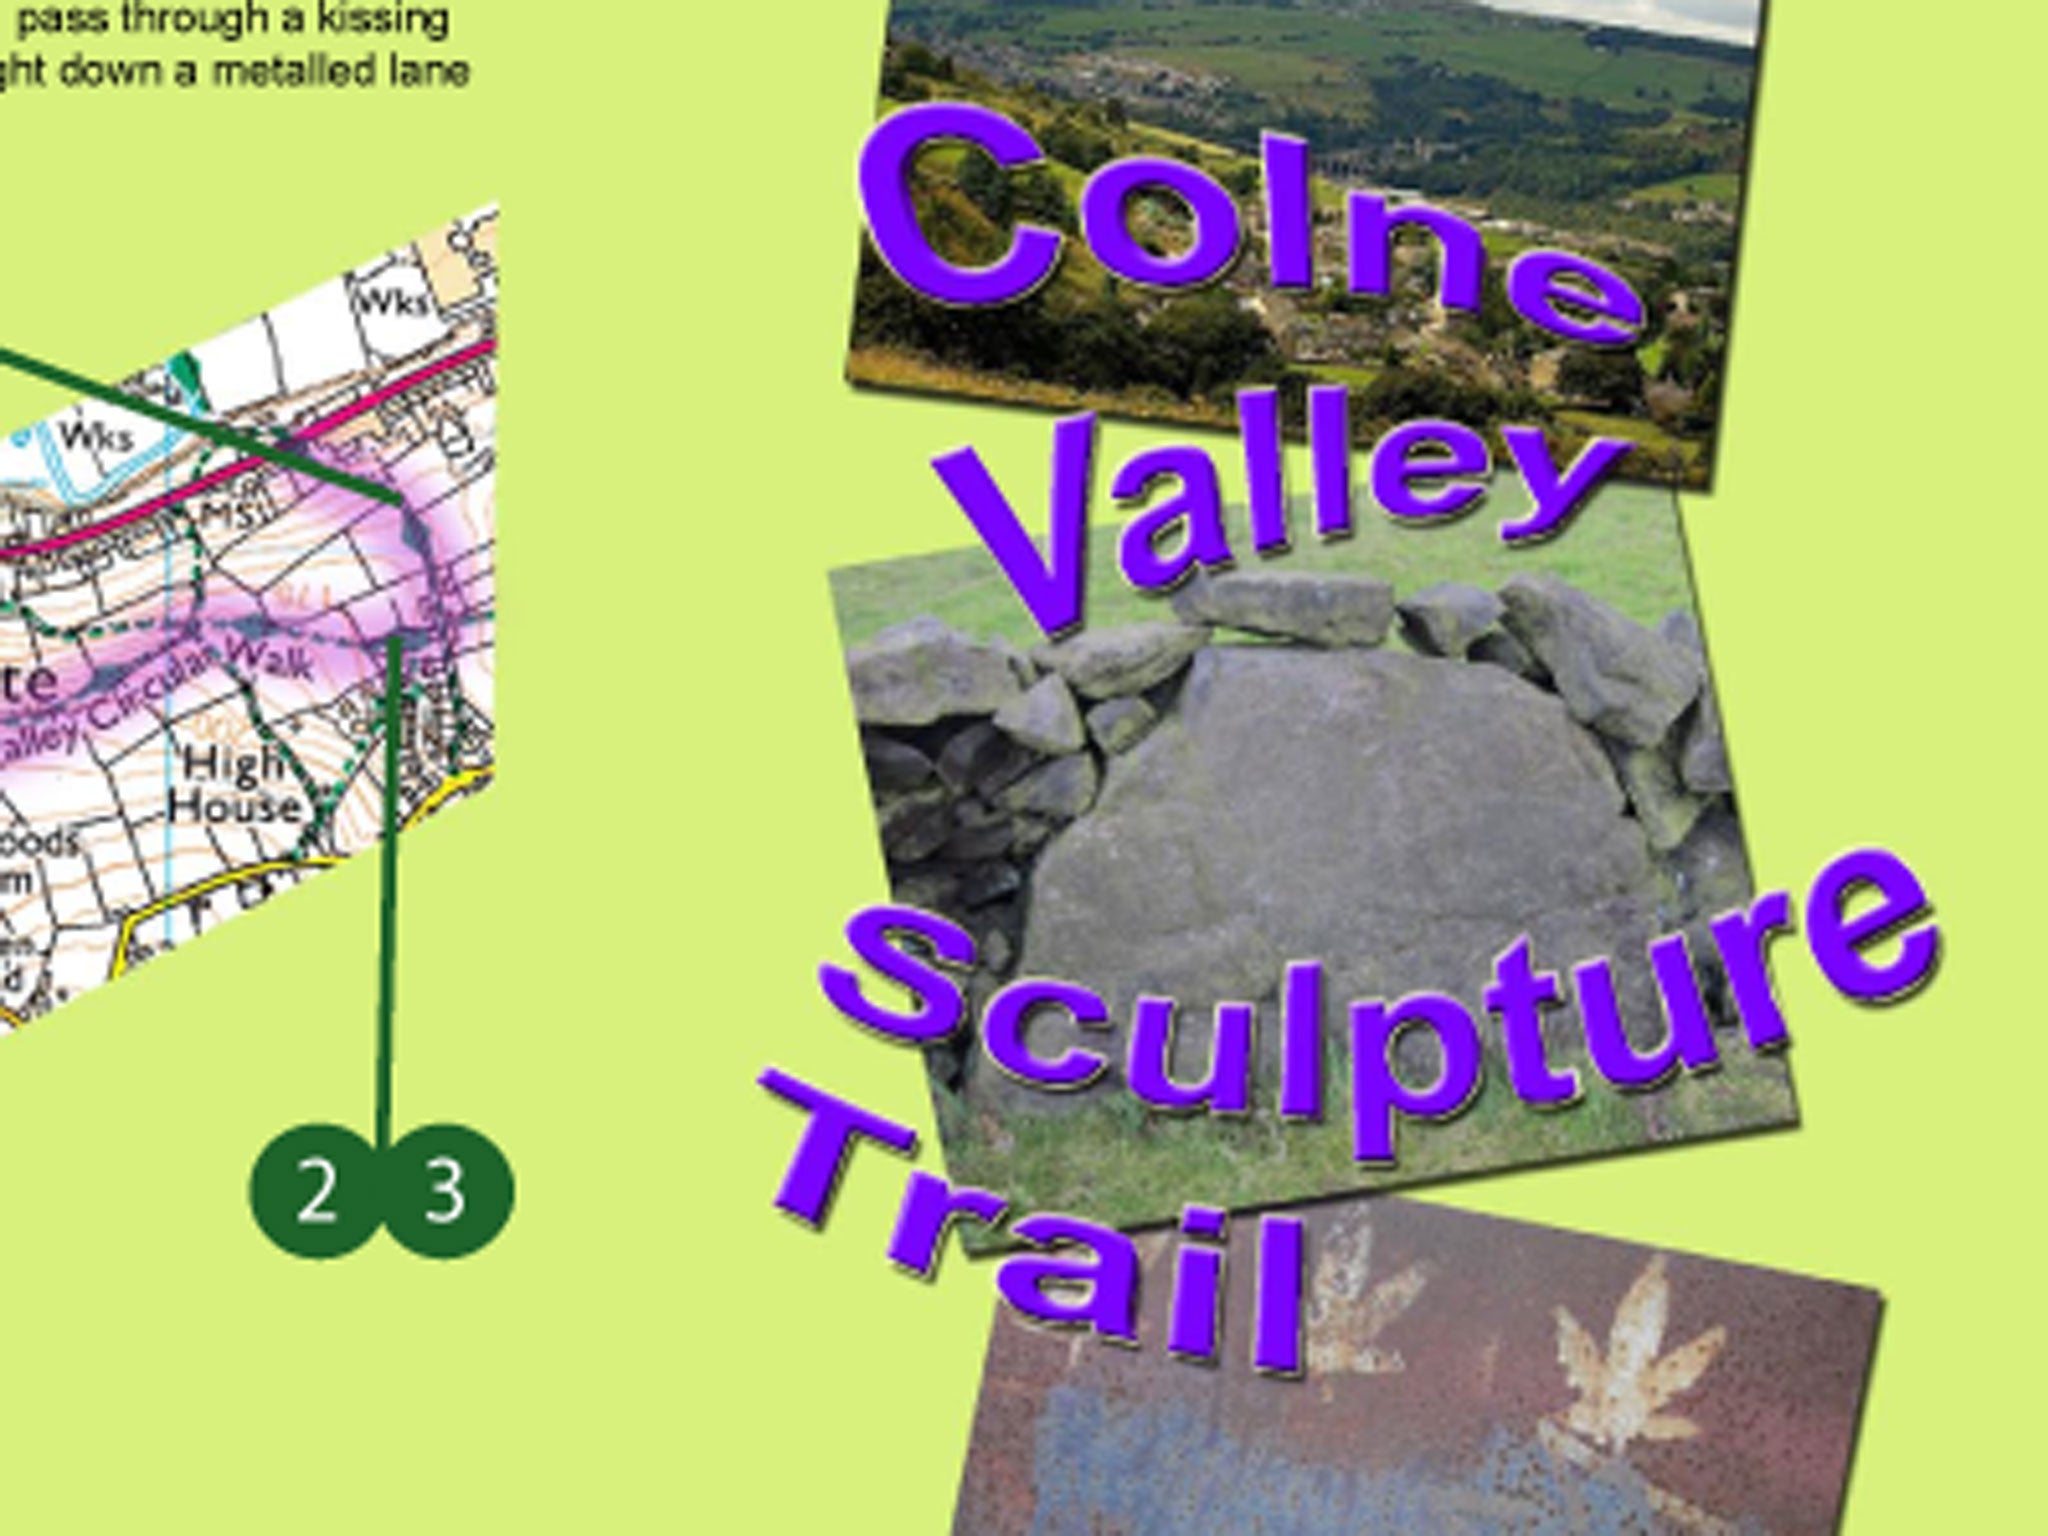 The Colne Valley Sculpture Trail 'highlights' include a circular metal fence and a derelict house